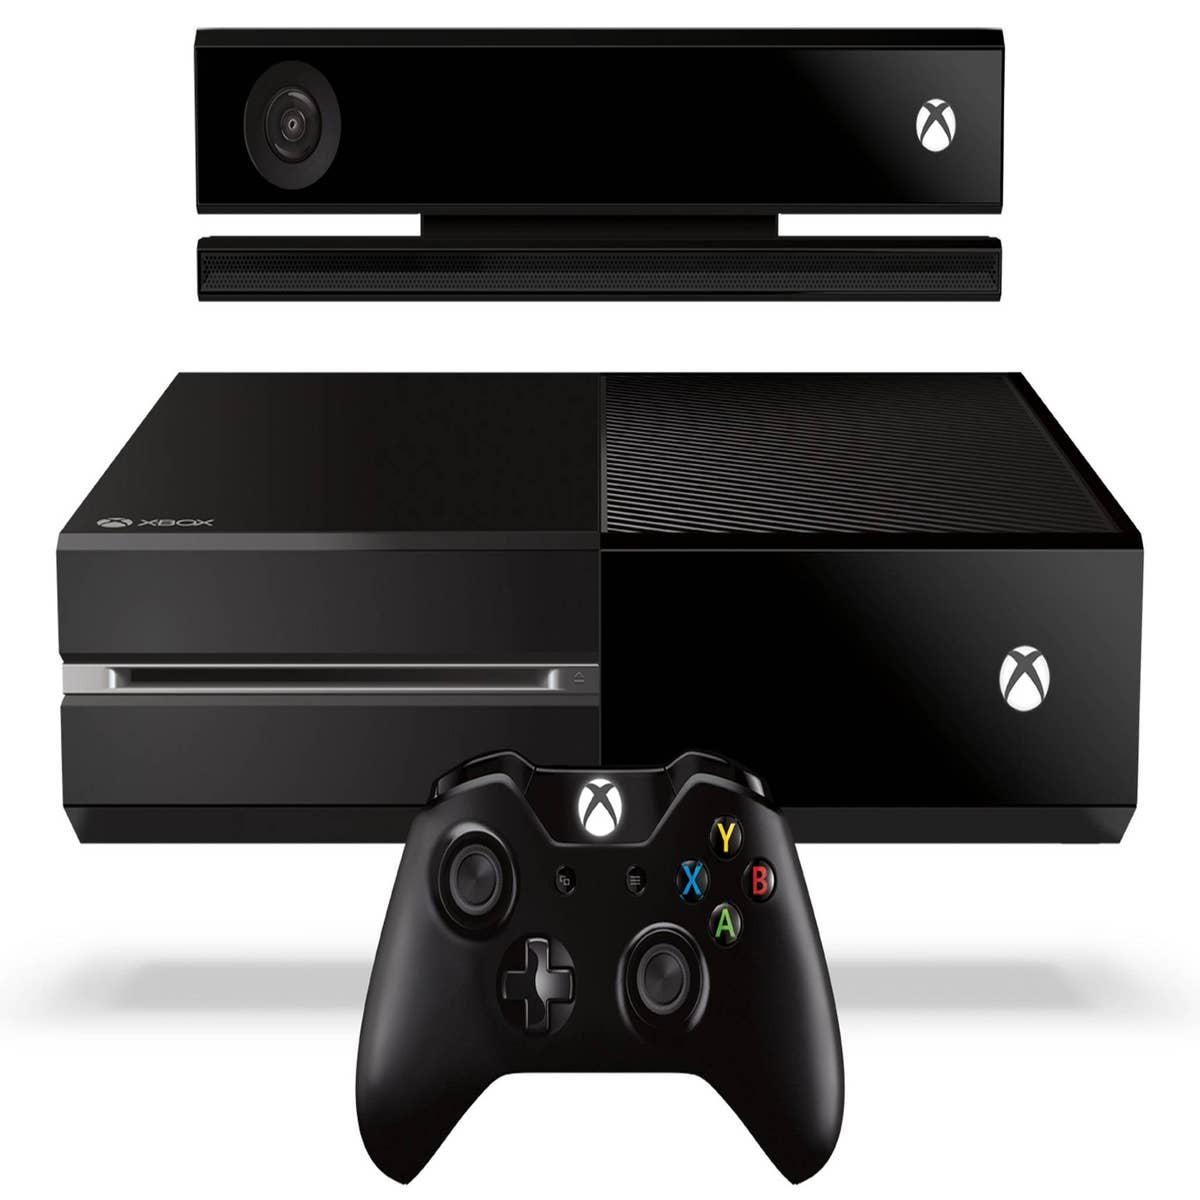 List Of Xbox 360 Games You Can Play On Xbox One